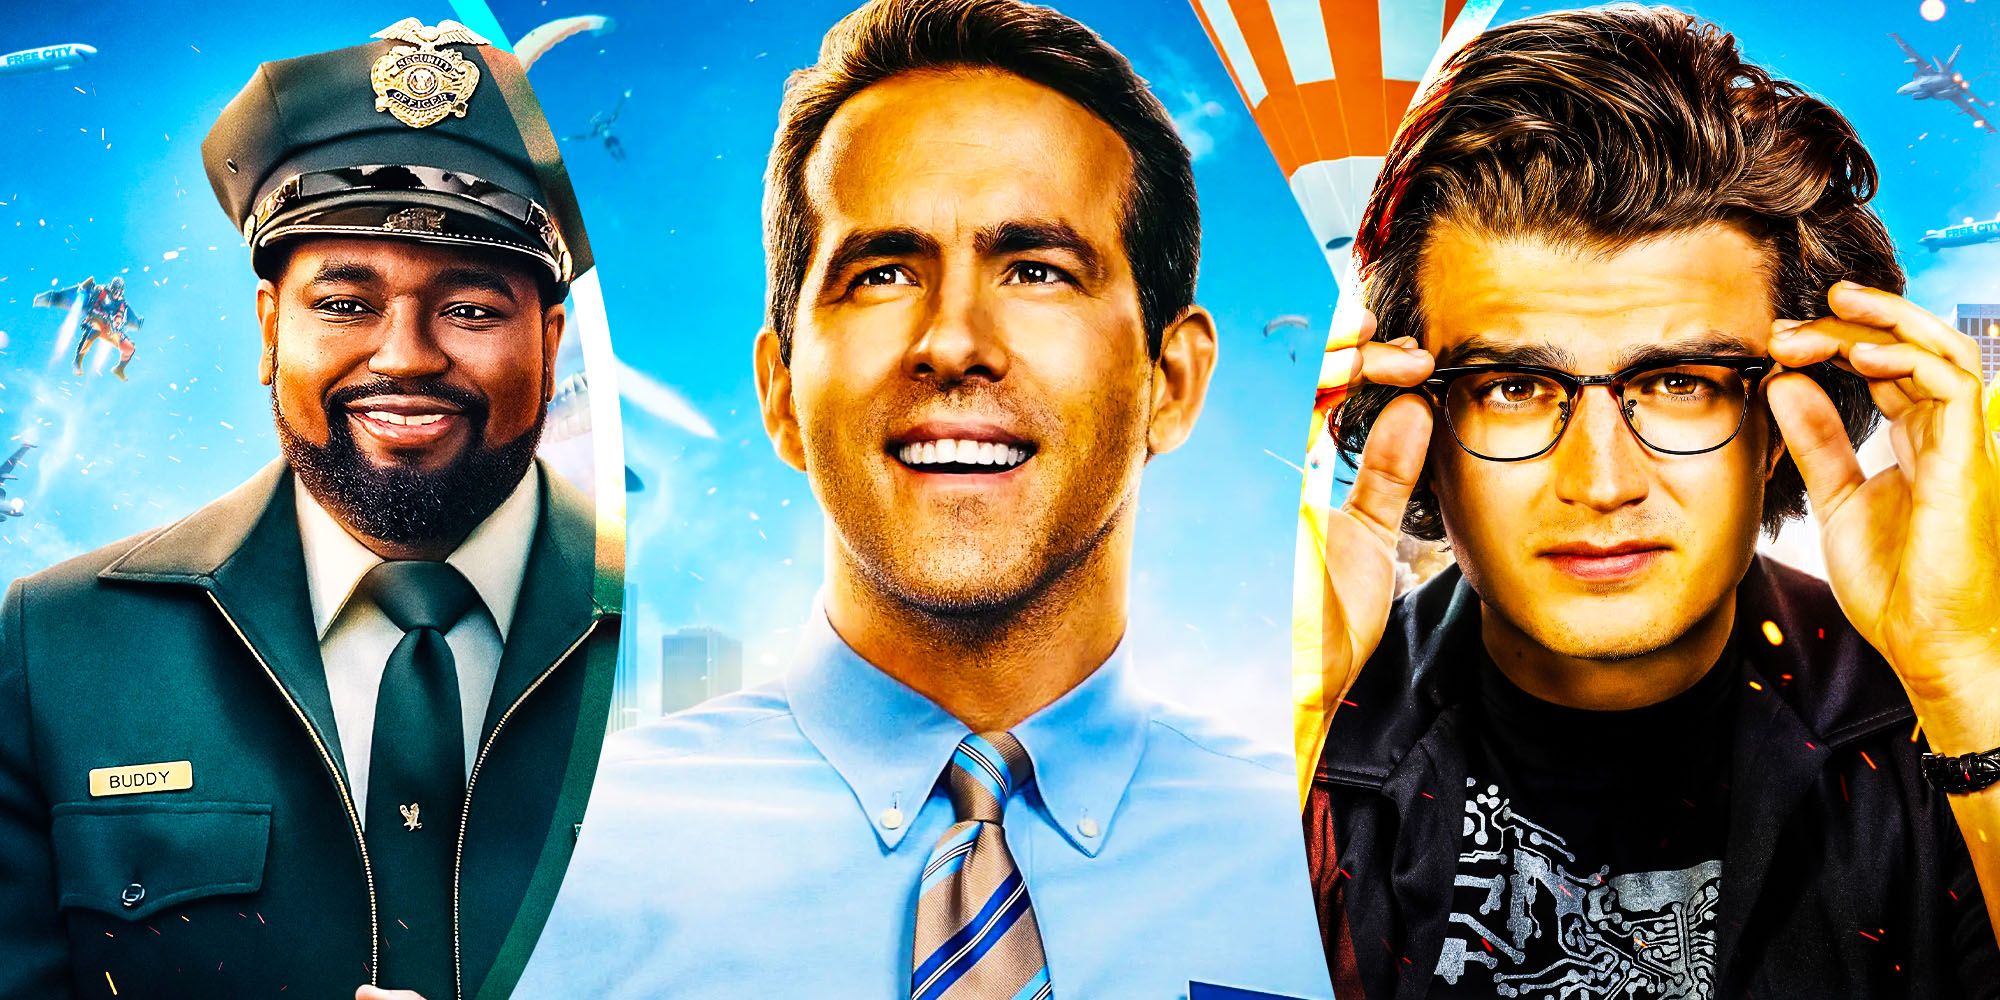 Free Guy cast and characters guide Ryan reynolds lil rel